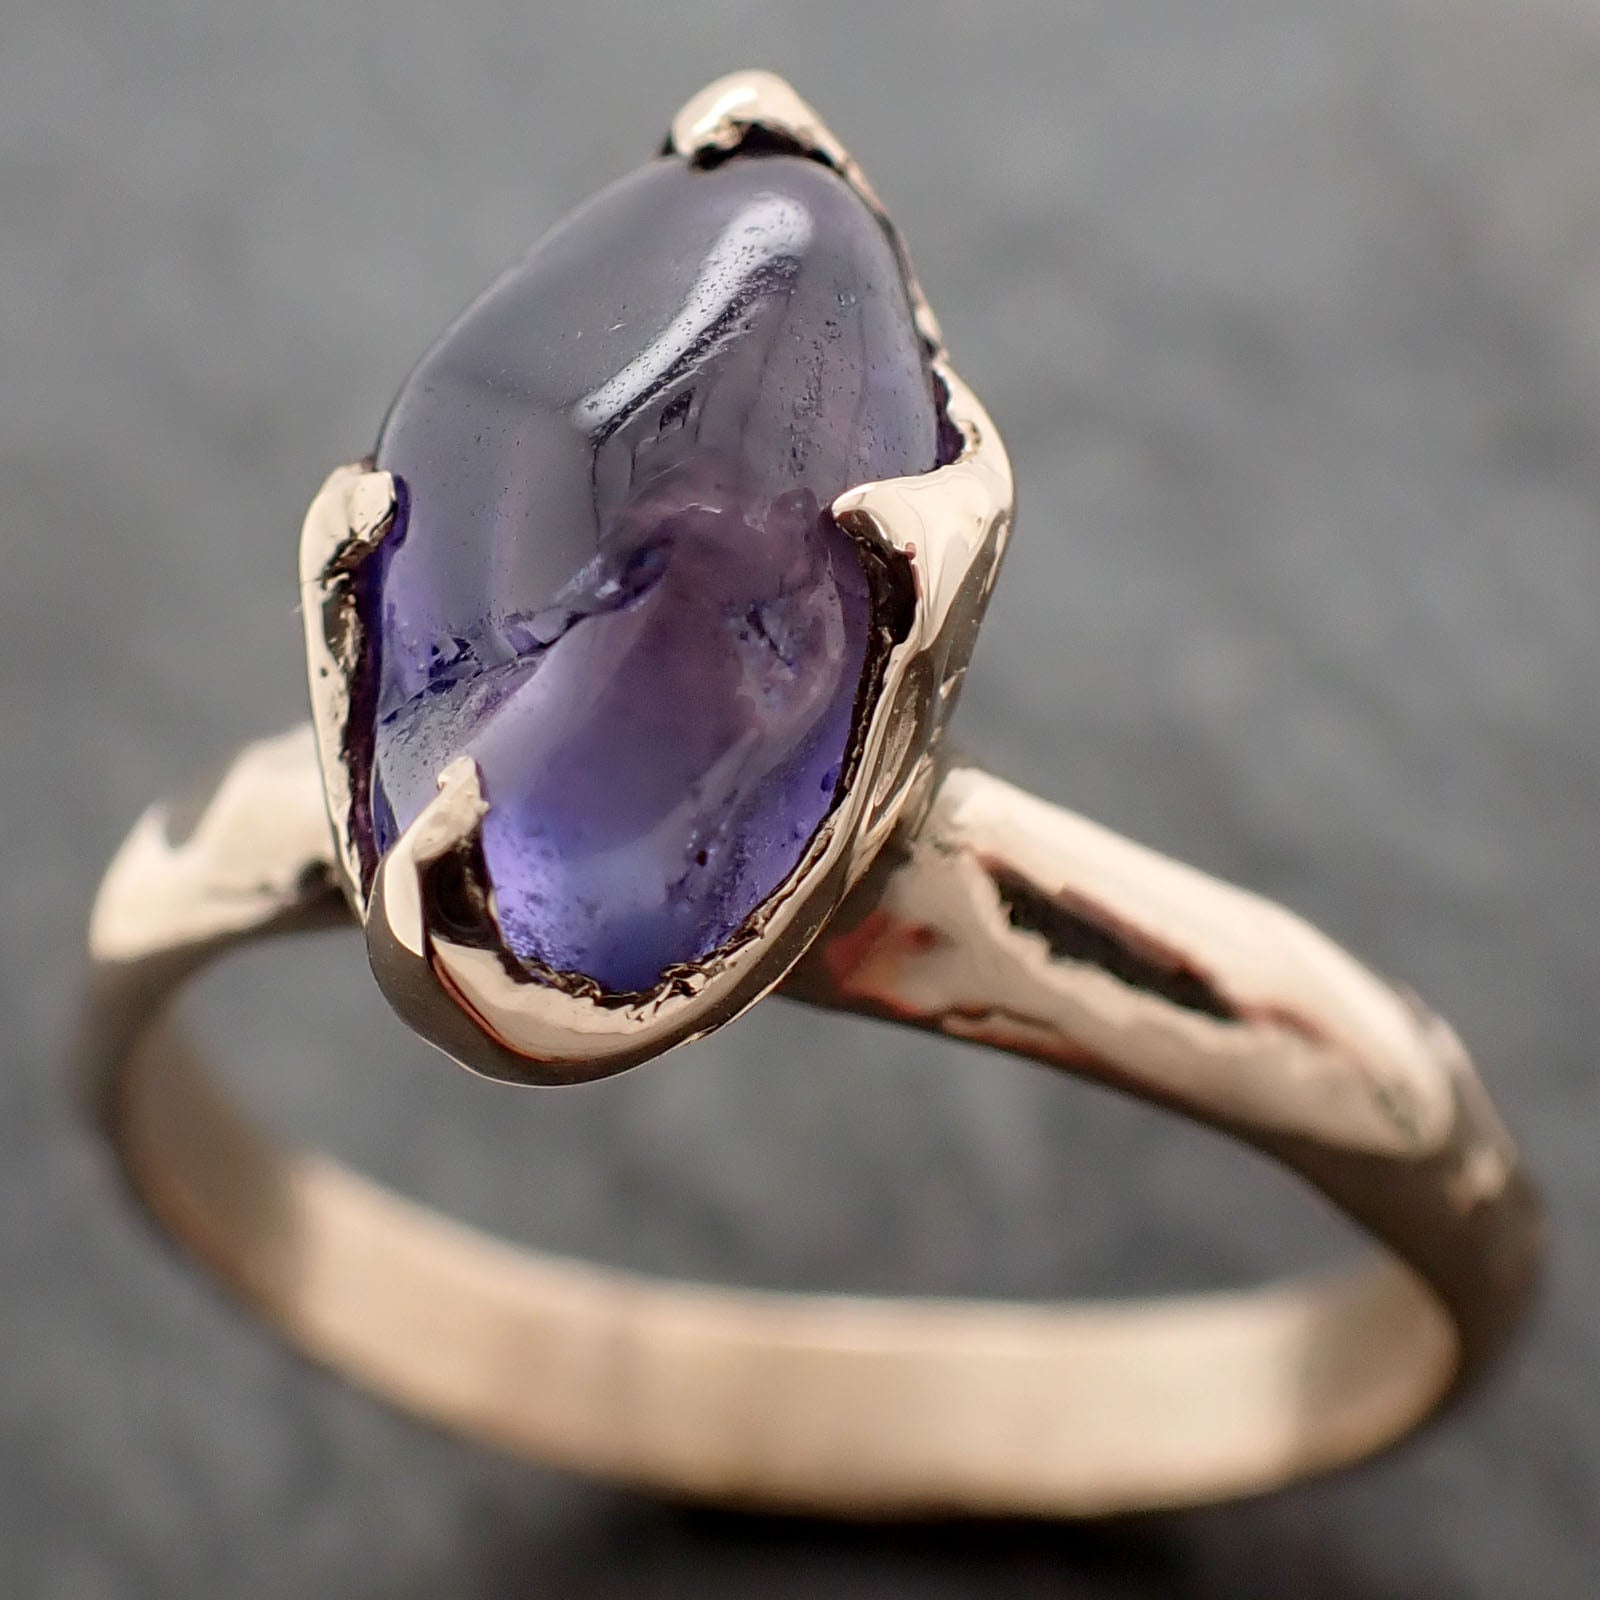 Sapphire tumbled 14k yellow gold Solitaire purple polished gemstone ring 2842